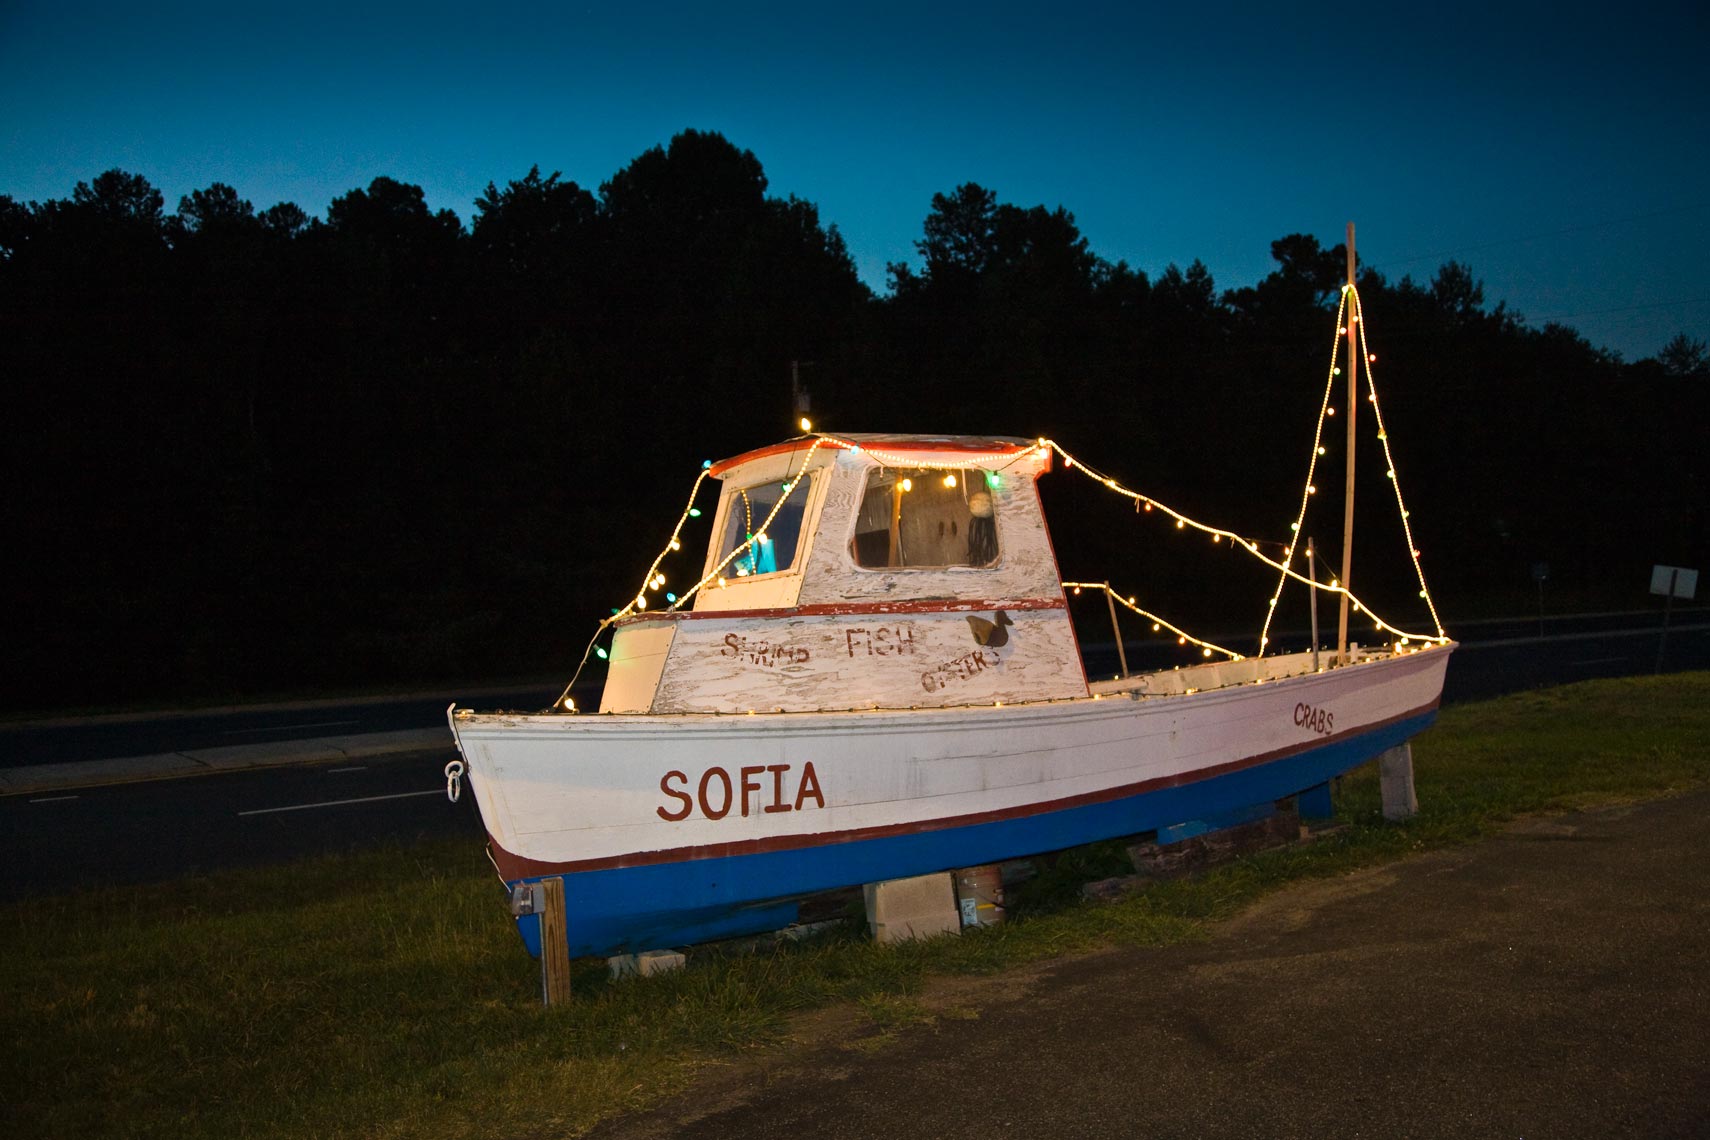  Boat on the grass at night, Chapel Hill, NC